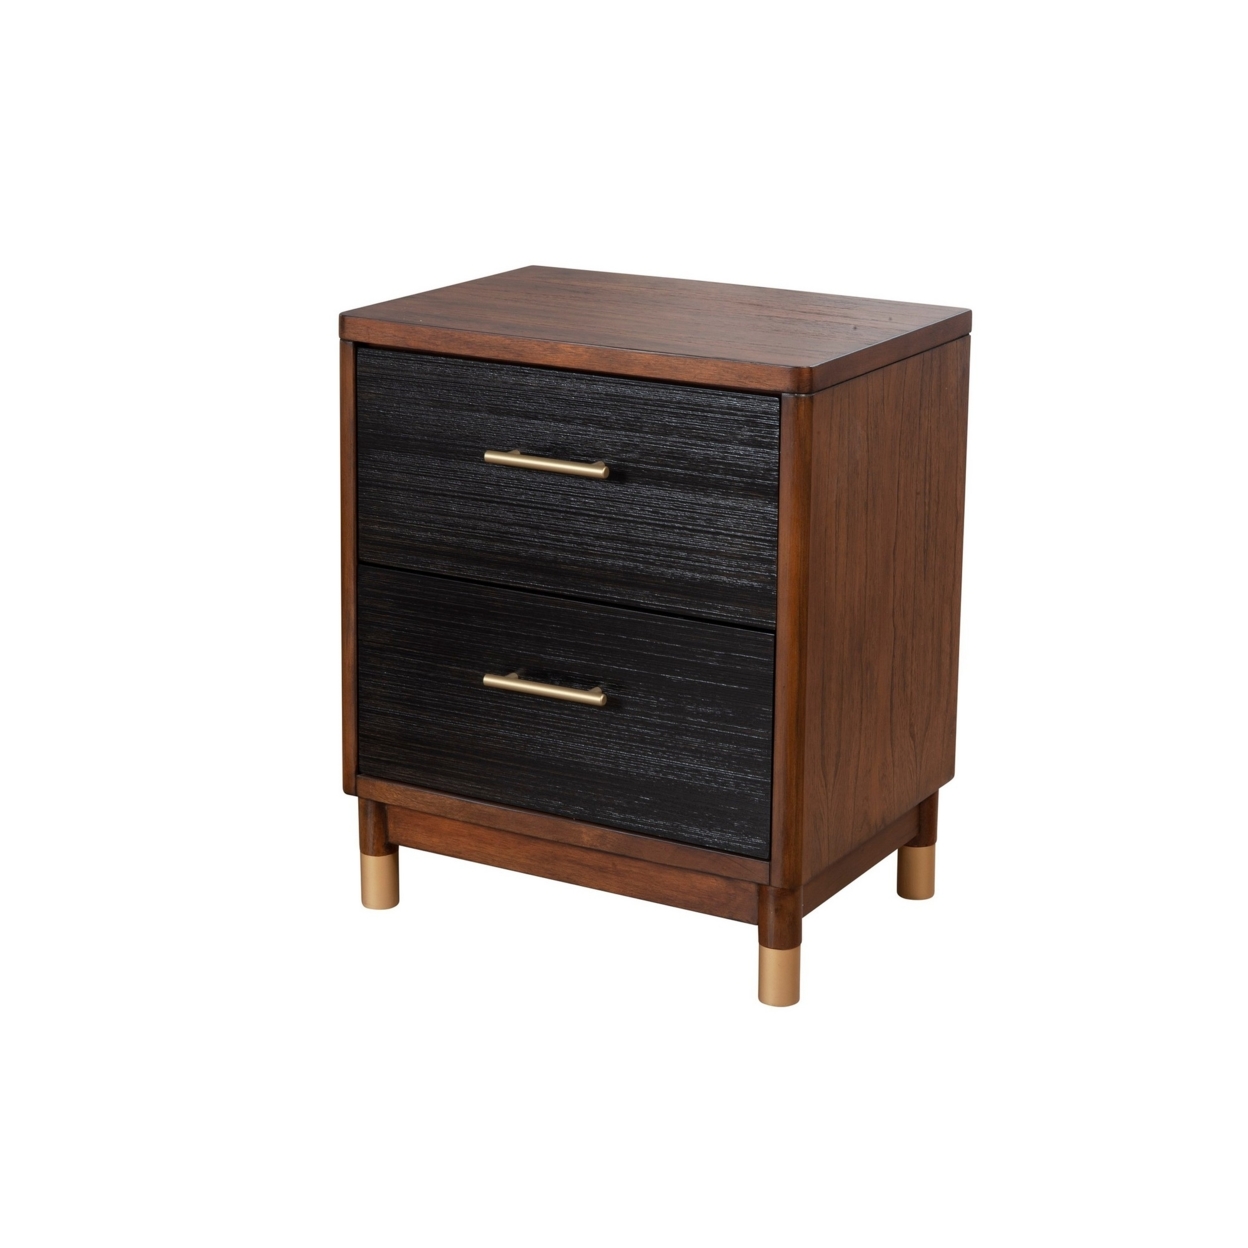 Nightstand With 2 Drawers And Round Legs, Brown And Black- Saltoro Sherpi